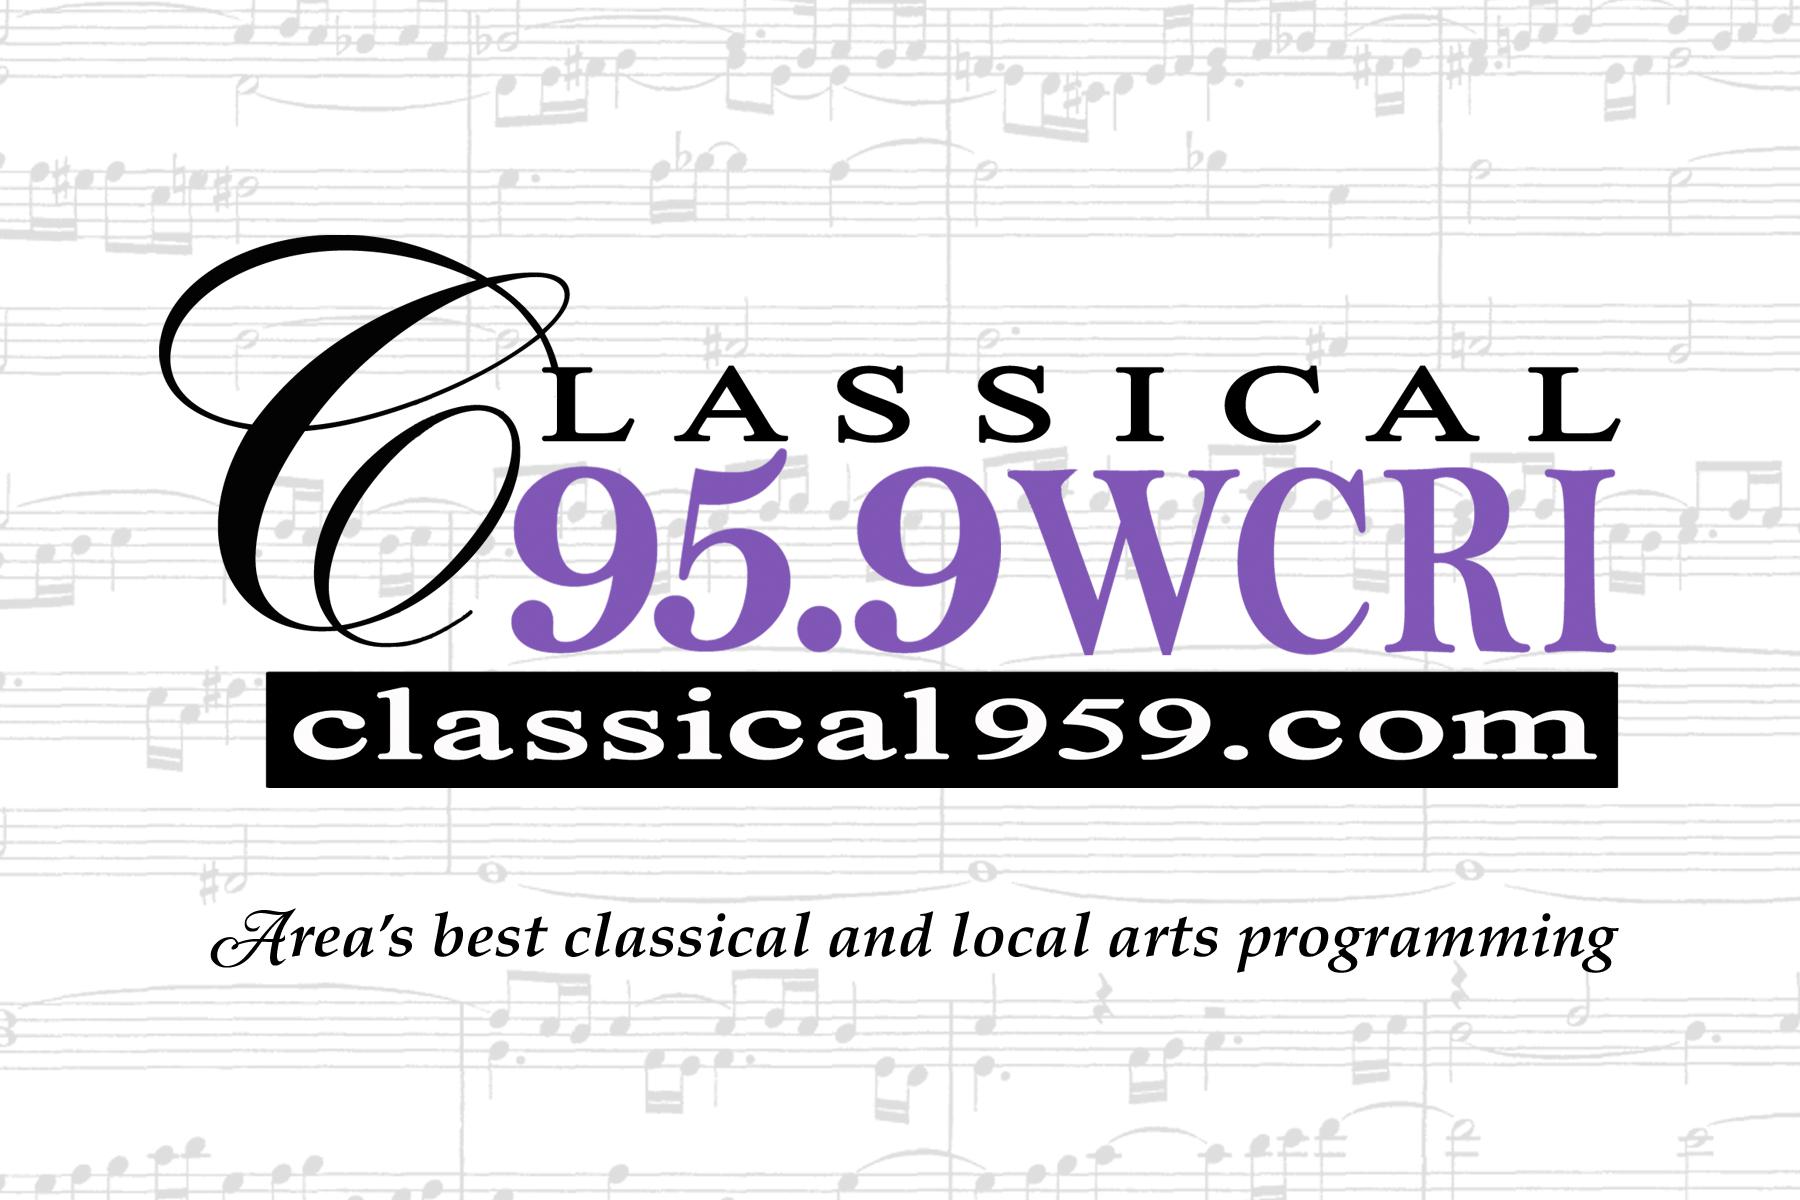 03-11-18   Winner of the 2017 Van Cliburn Piano Competition Yekwon Sunwoo  -  WCRI’s Festival Series featuring The Newport Music Festival